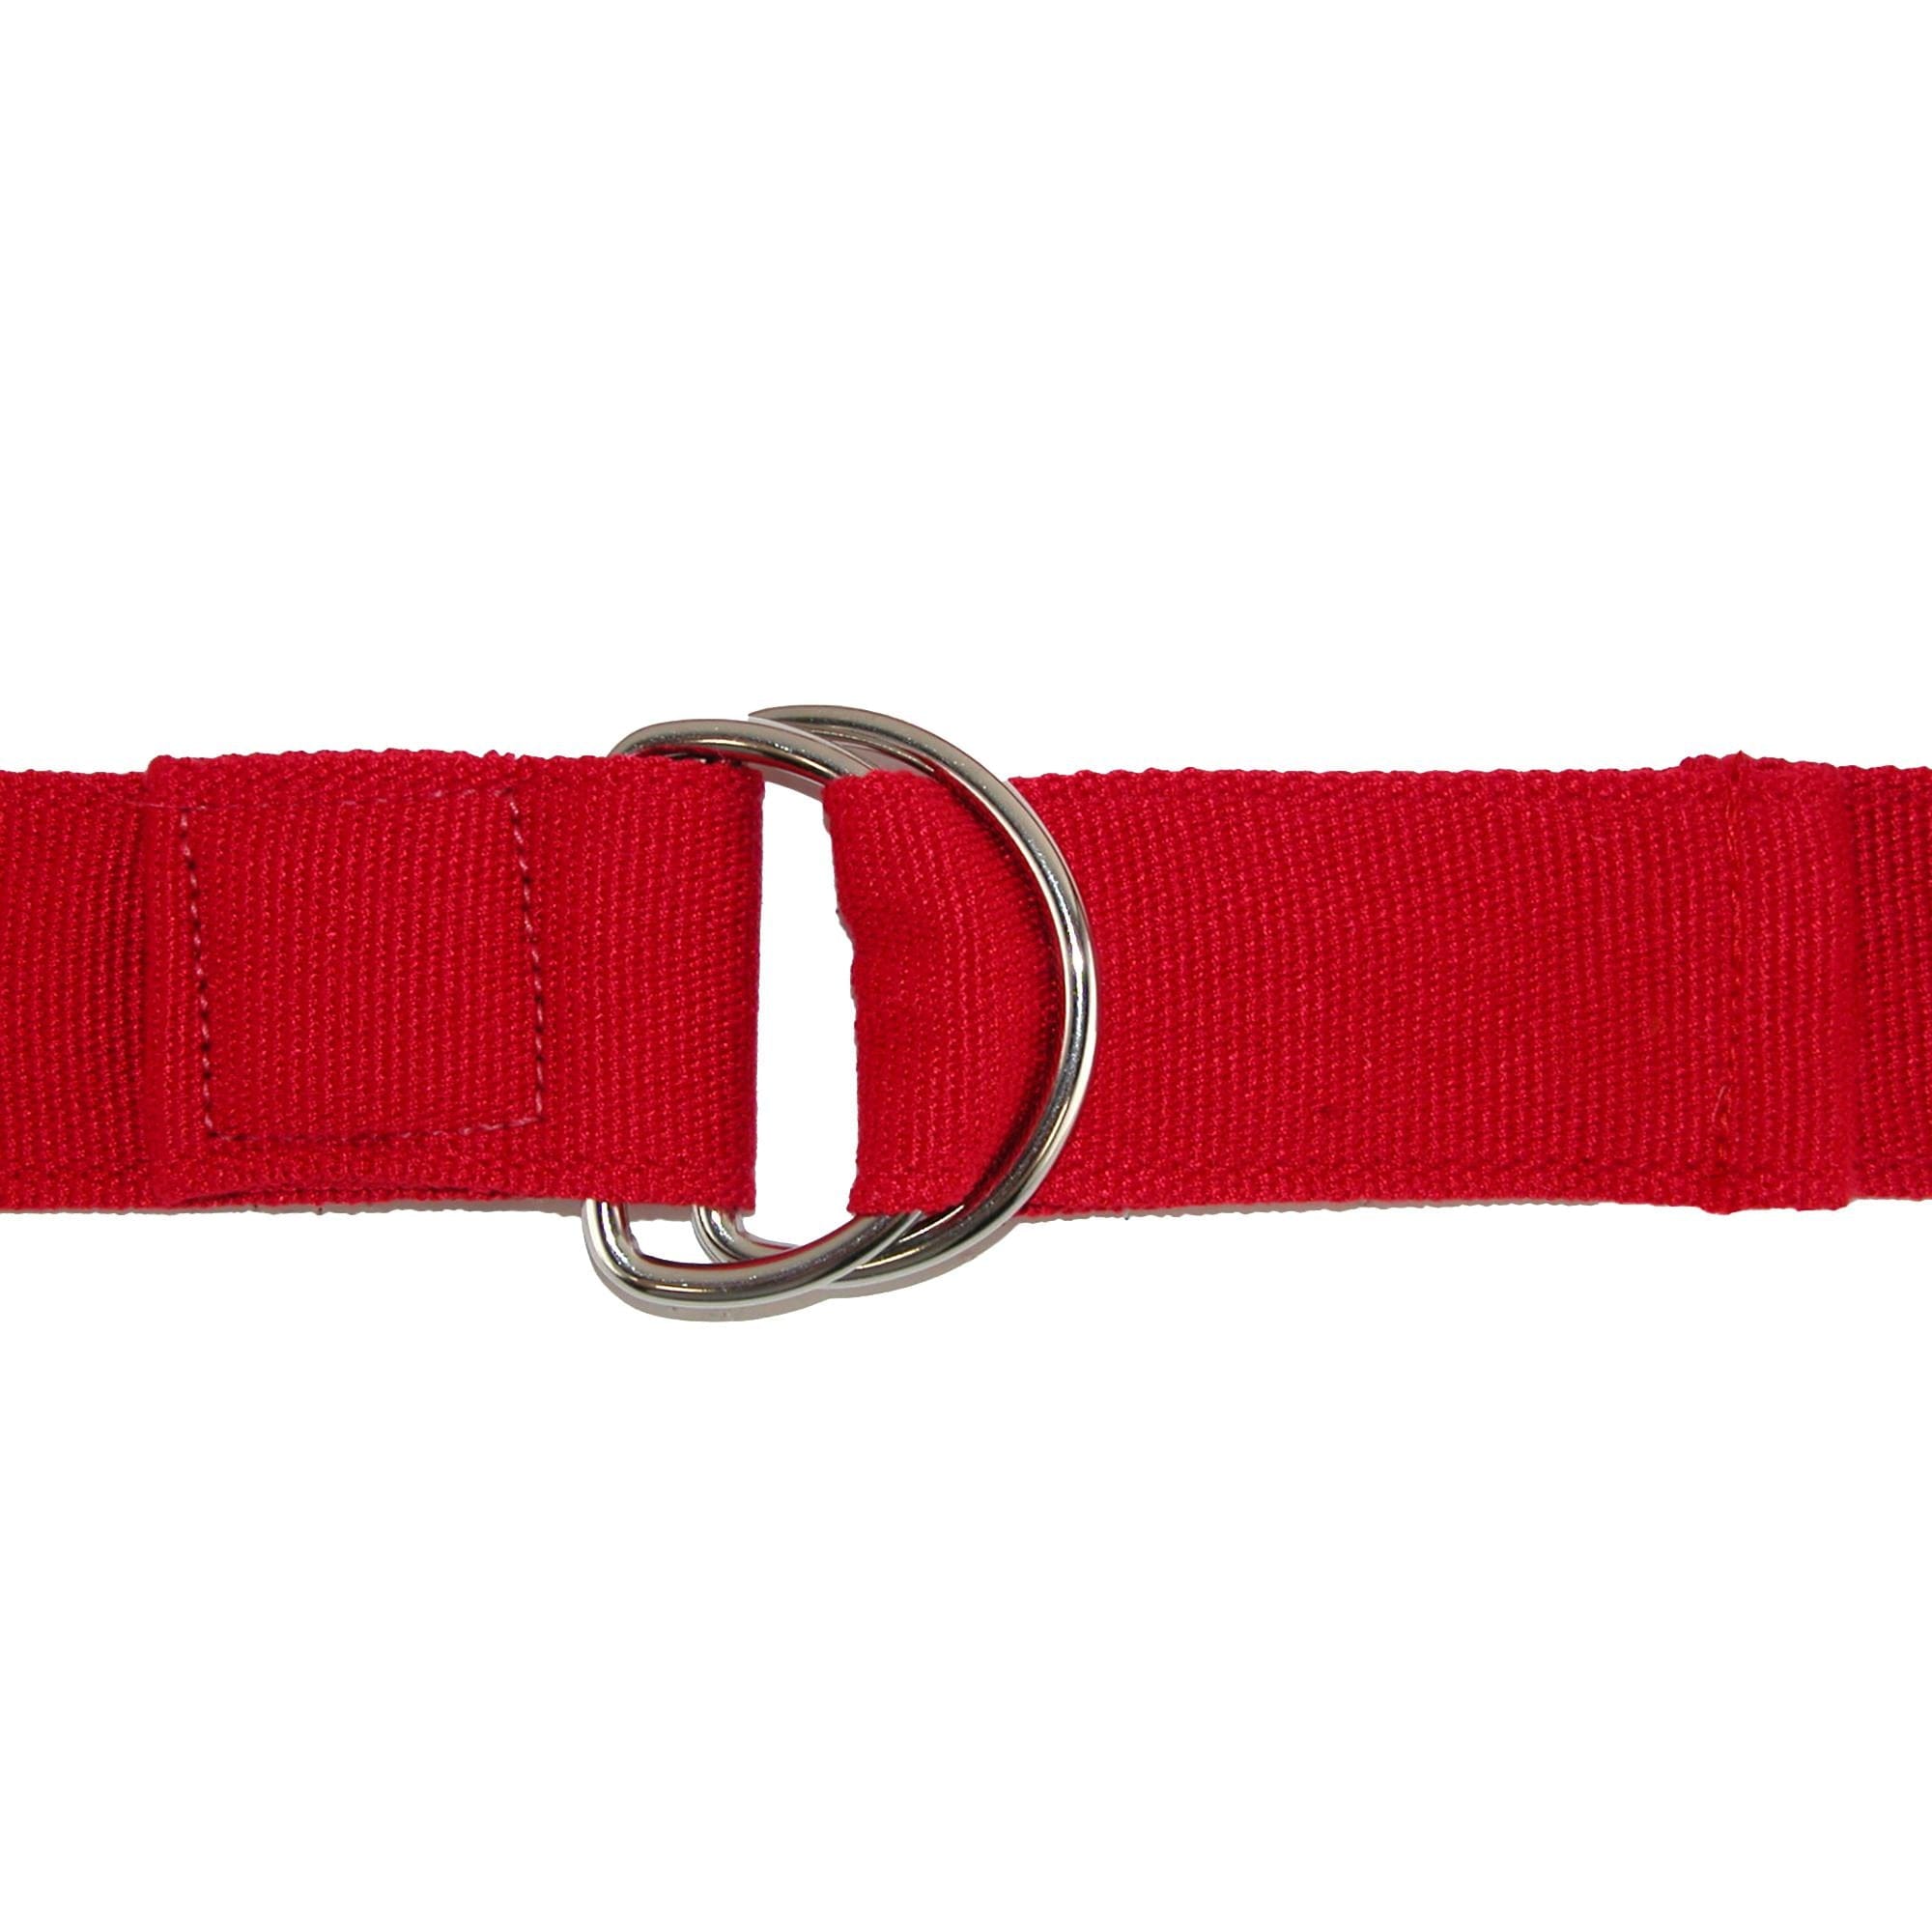 Canvas Web Belt Double D-Ring Buckle 1.5 Wide with Metal Tip